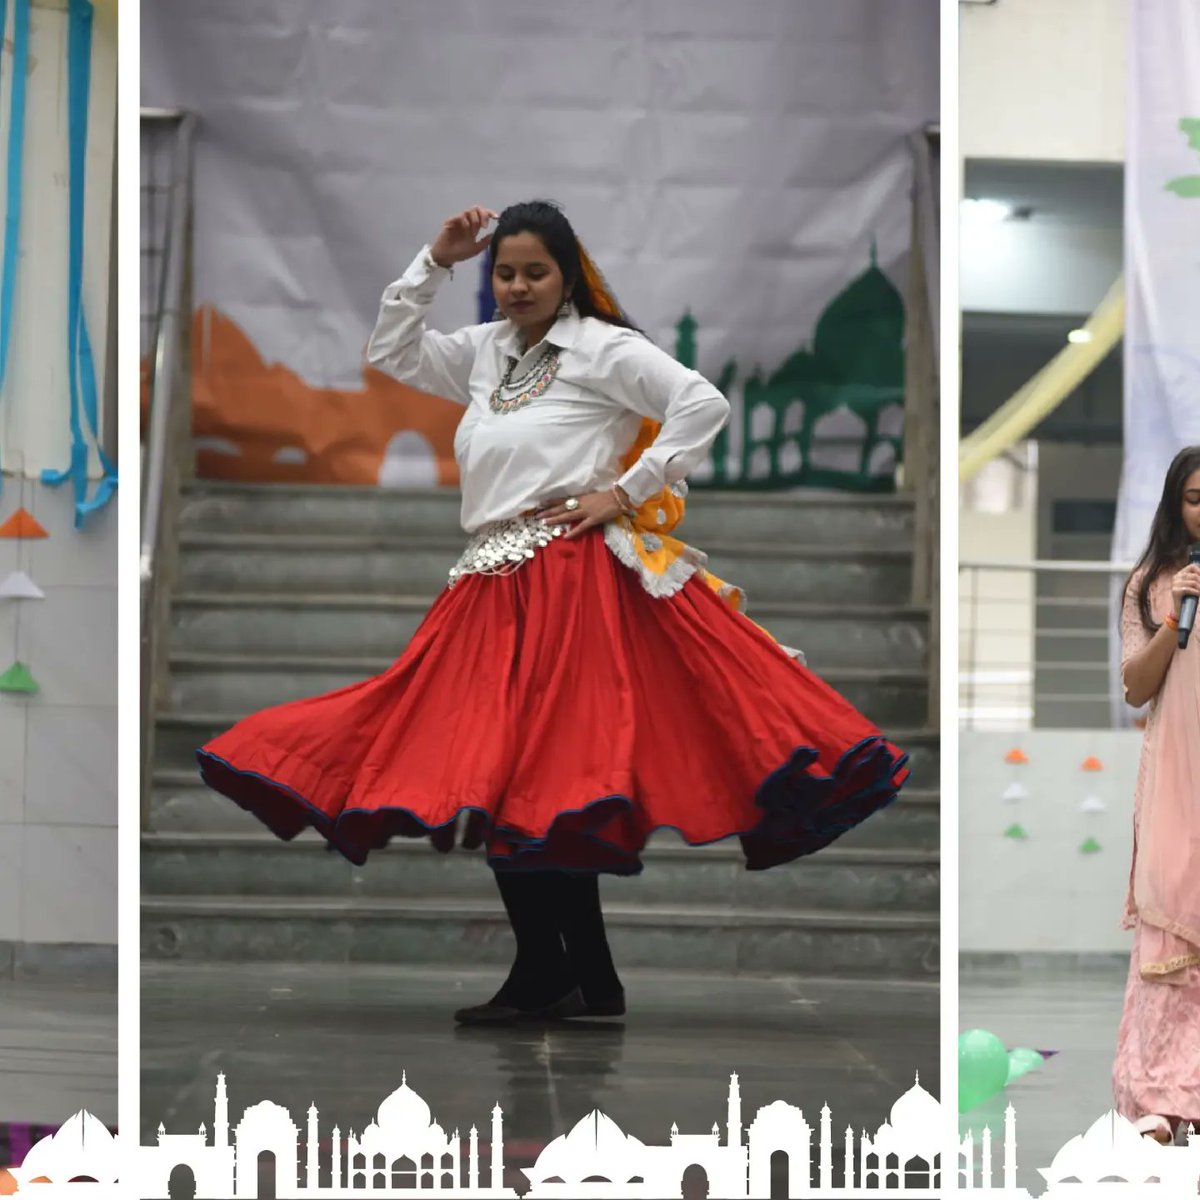 NIFT Raebareli celebrated the 75th Republic Day with a variety of cultural performances that inspired a sense of patriotism in everyone.
#nift #niftrbl #republicday #tricolour #republicdaycelebrations #culturalevents